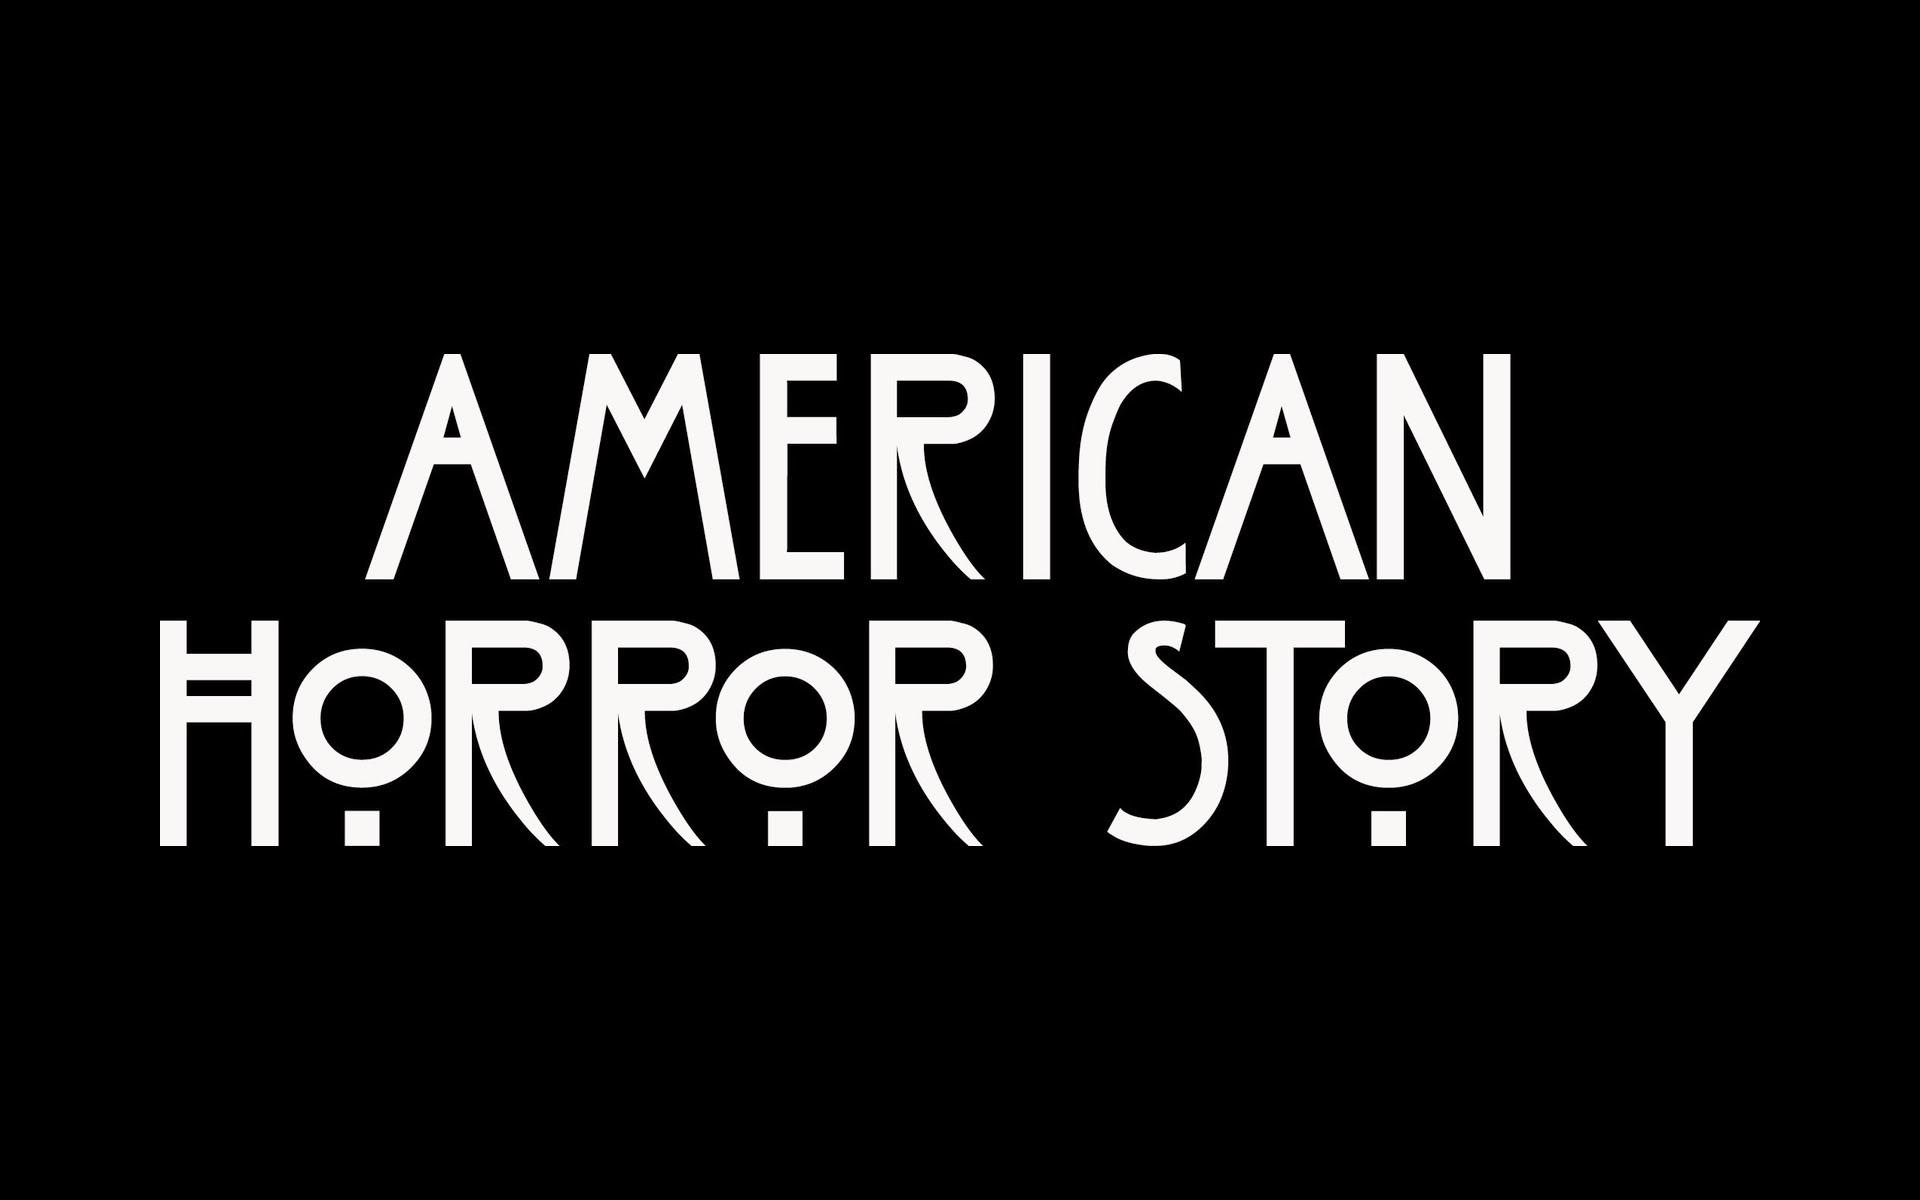 Awesome Image. American Horror Story Widescreen